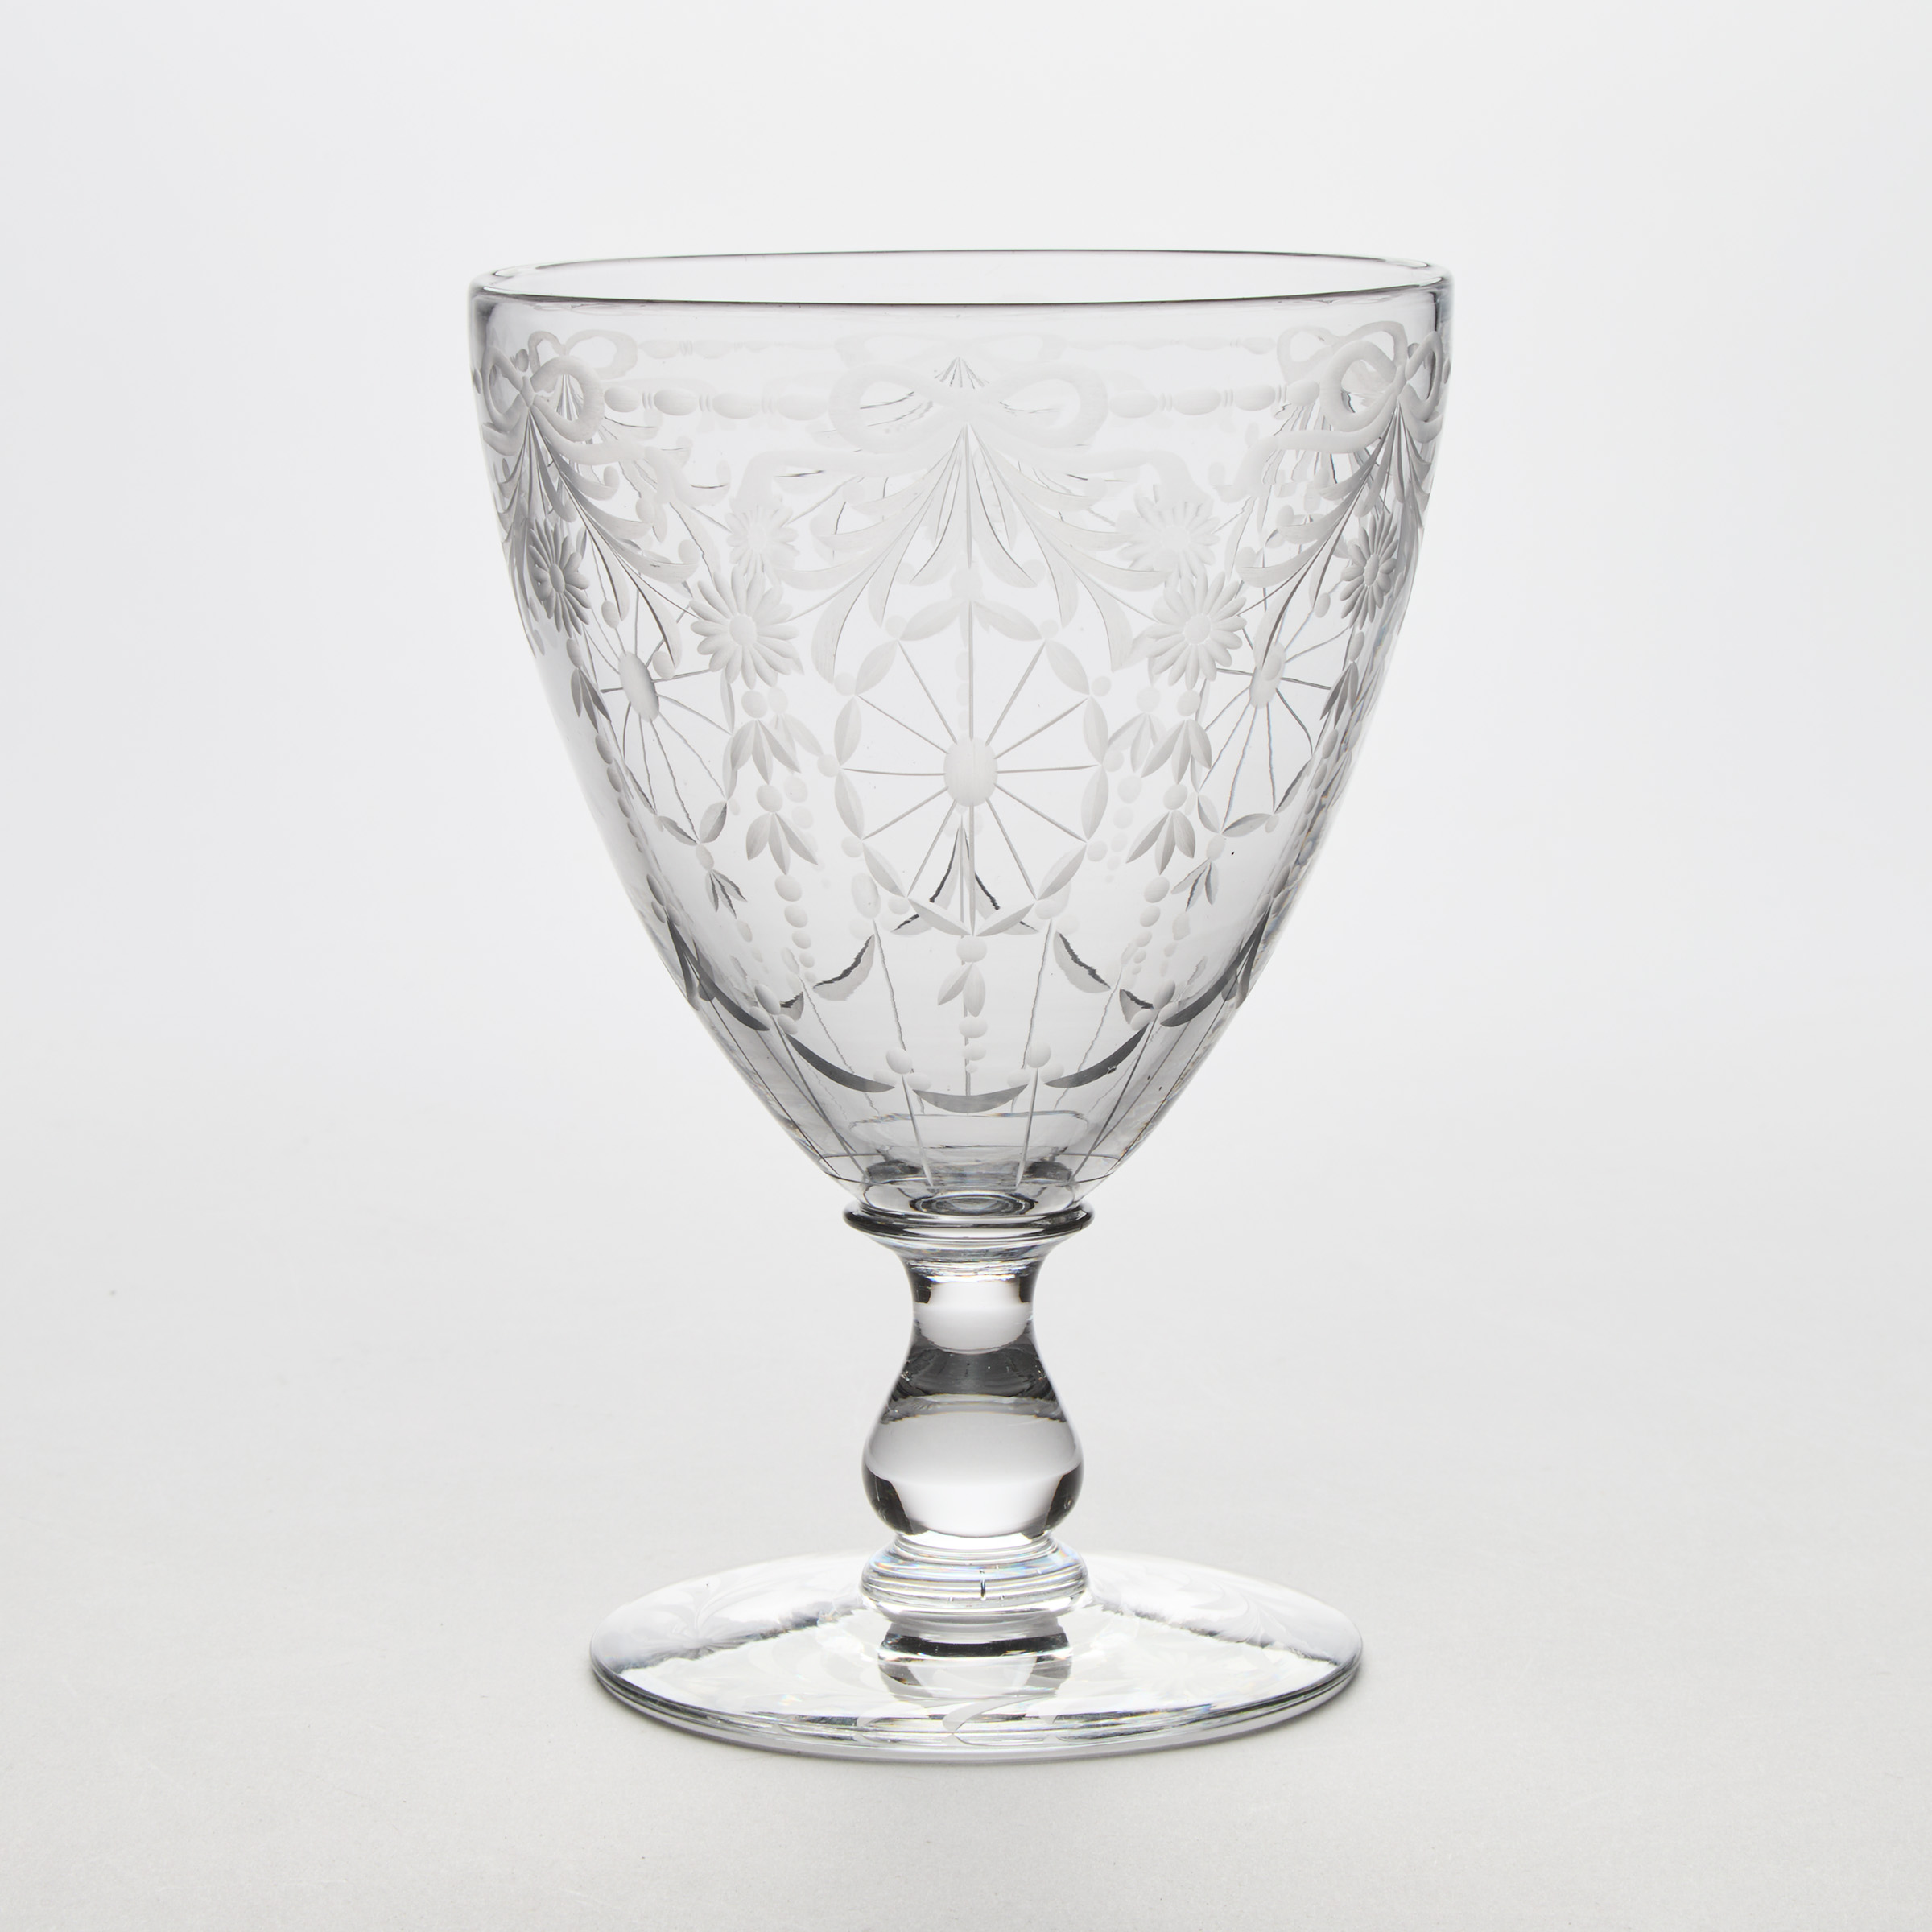 English Engraved Glass Large Goblet  2fb051c